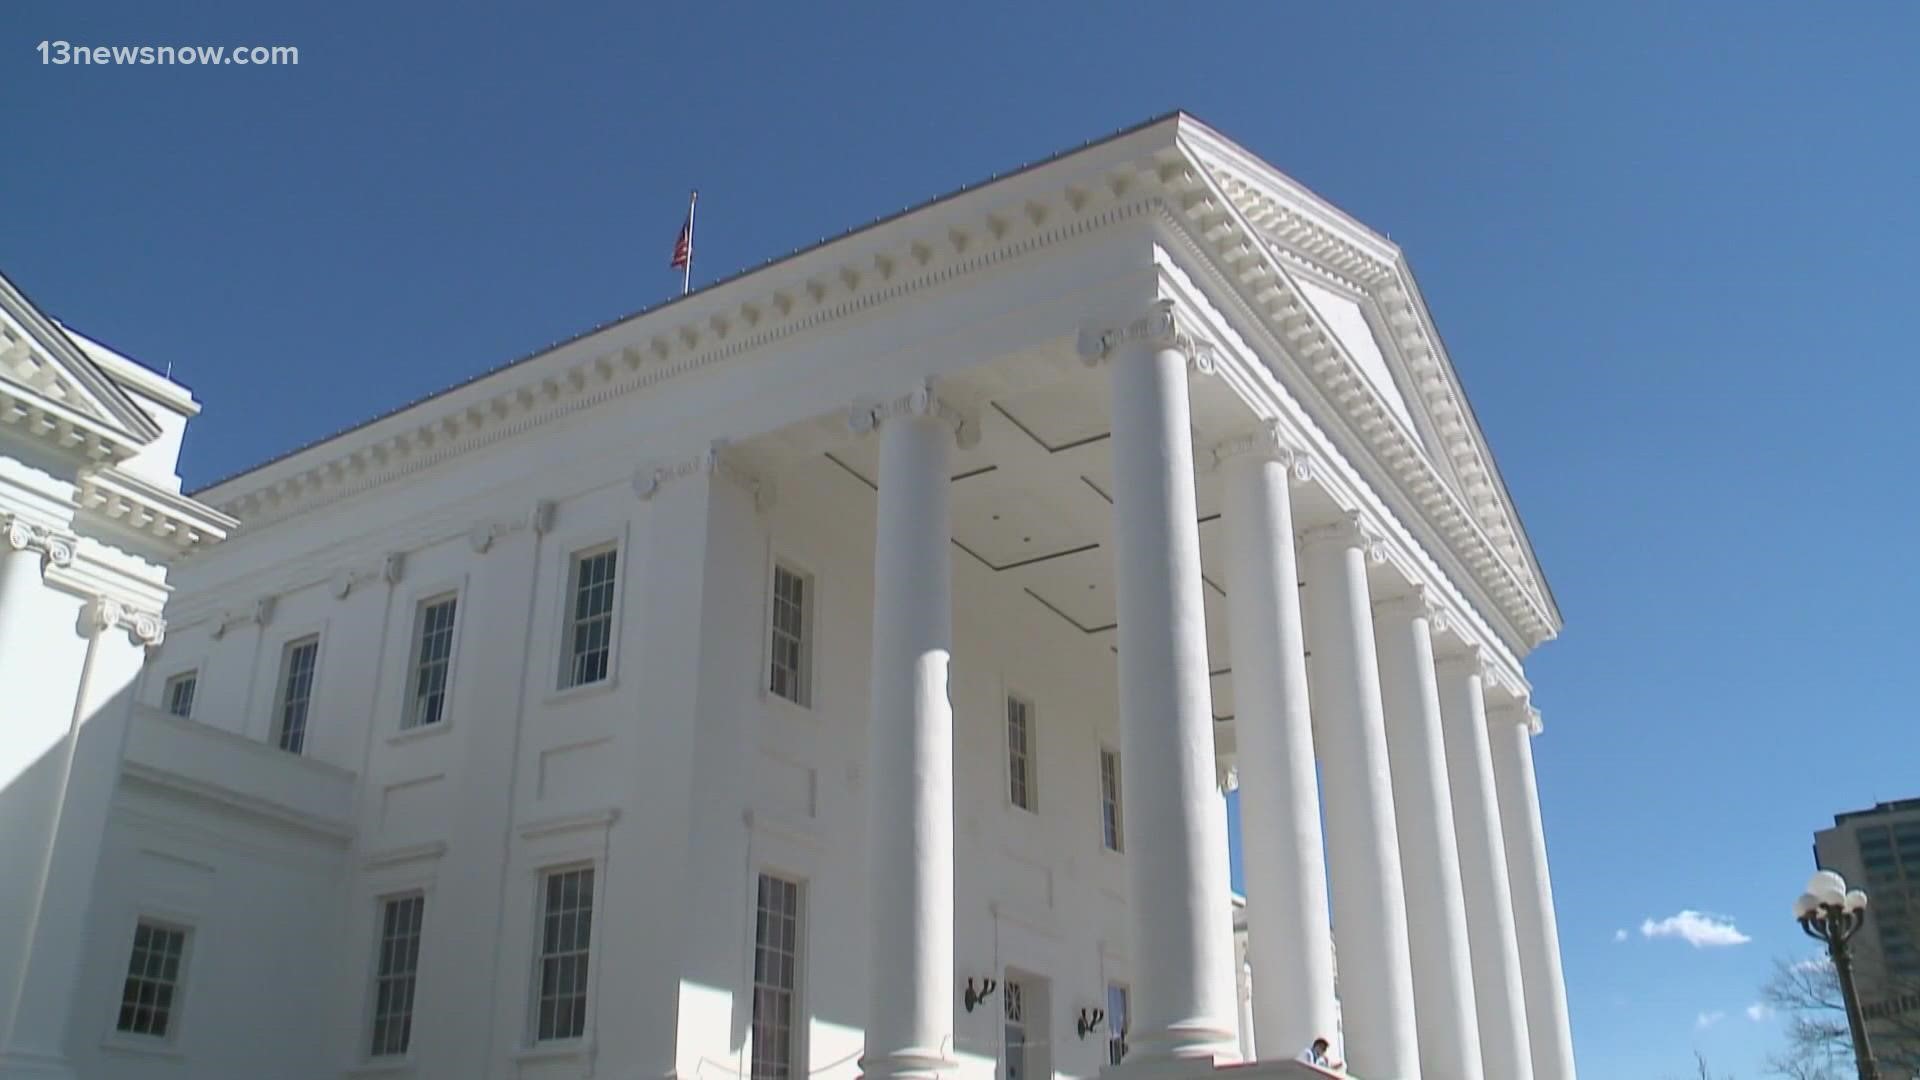 Several new laws are taking effect in Virginia on July 1.